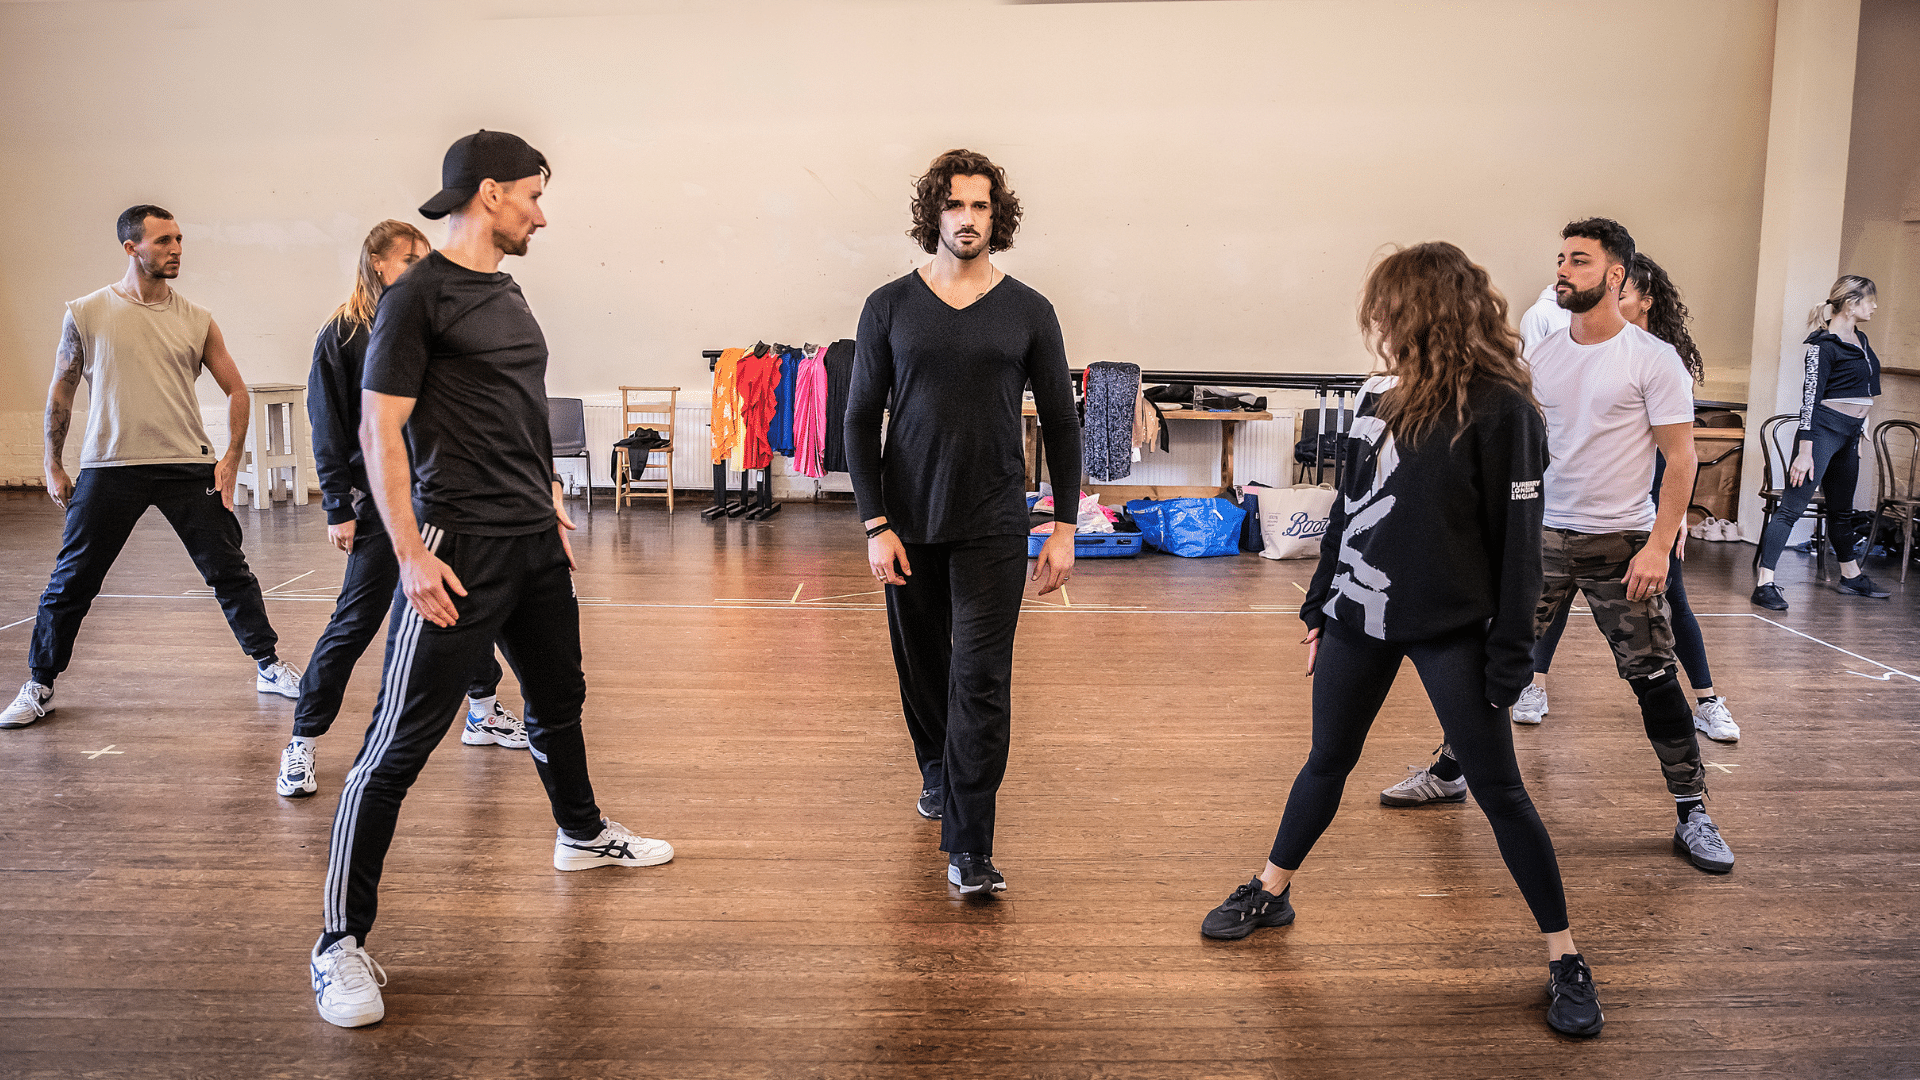 Rehearsal photo. Graziano Di Prima, dressed in all black, walks towards the camera with an intense expression. A triangle of six other dancers stand in a wide-stance and watch him move through their group.